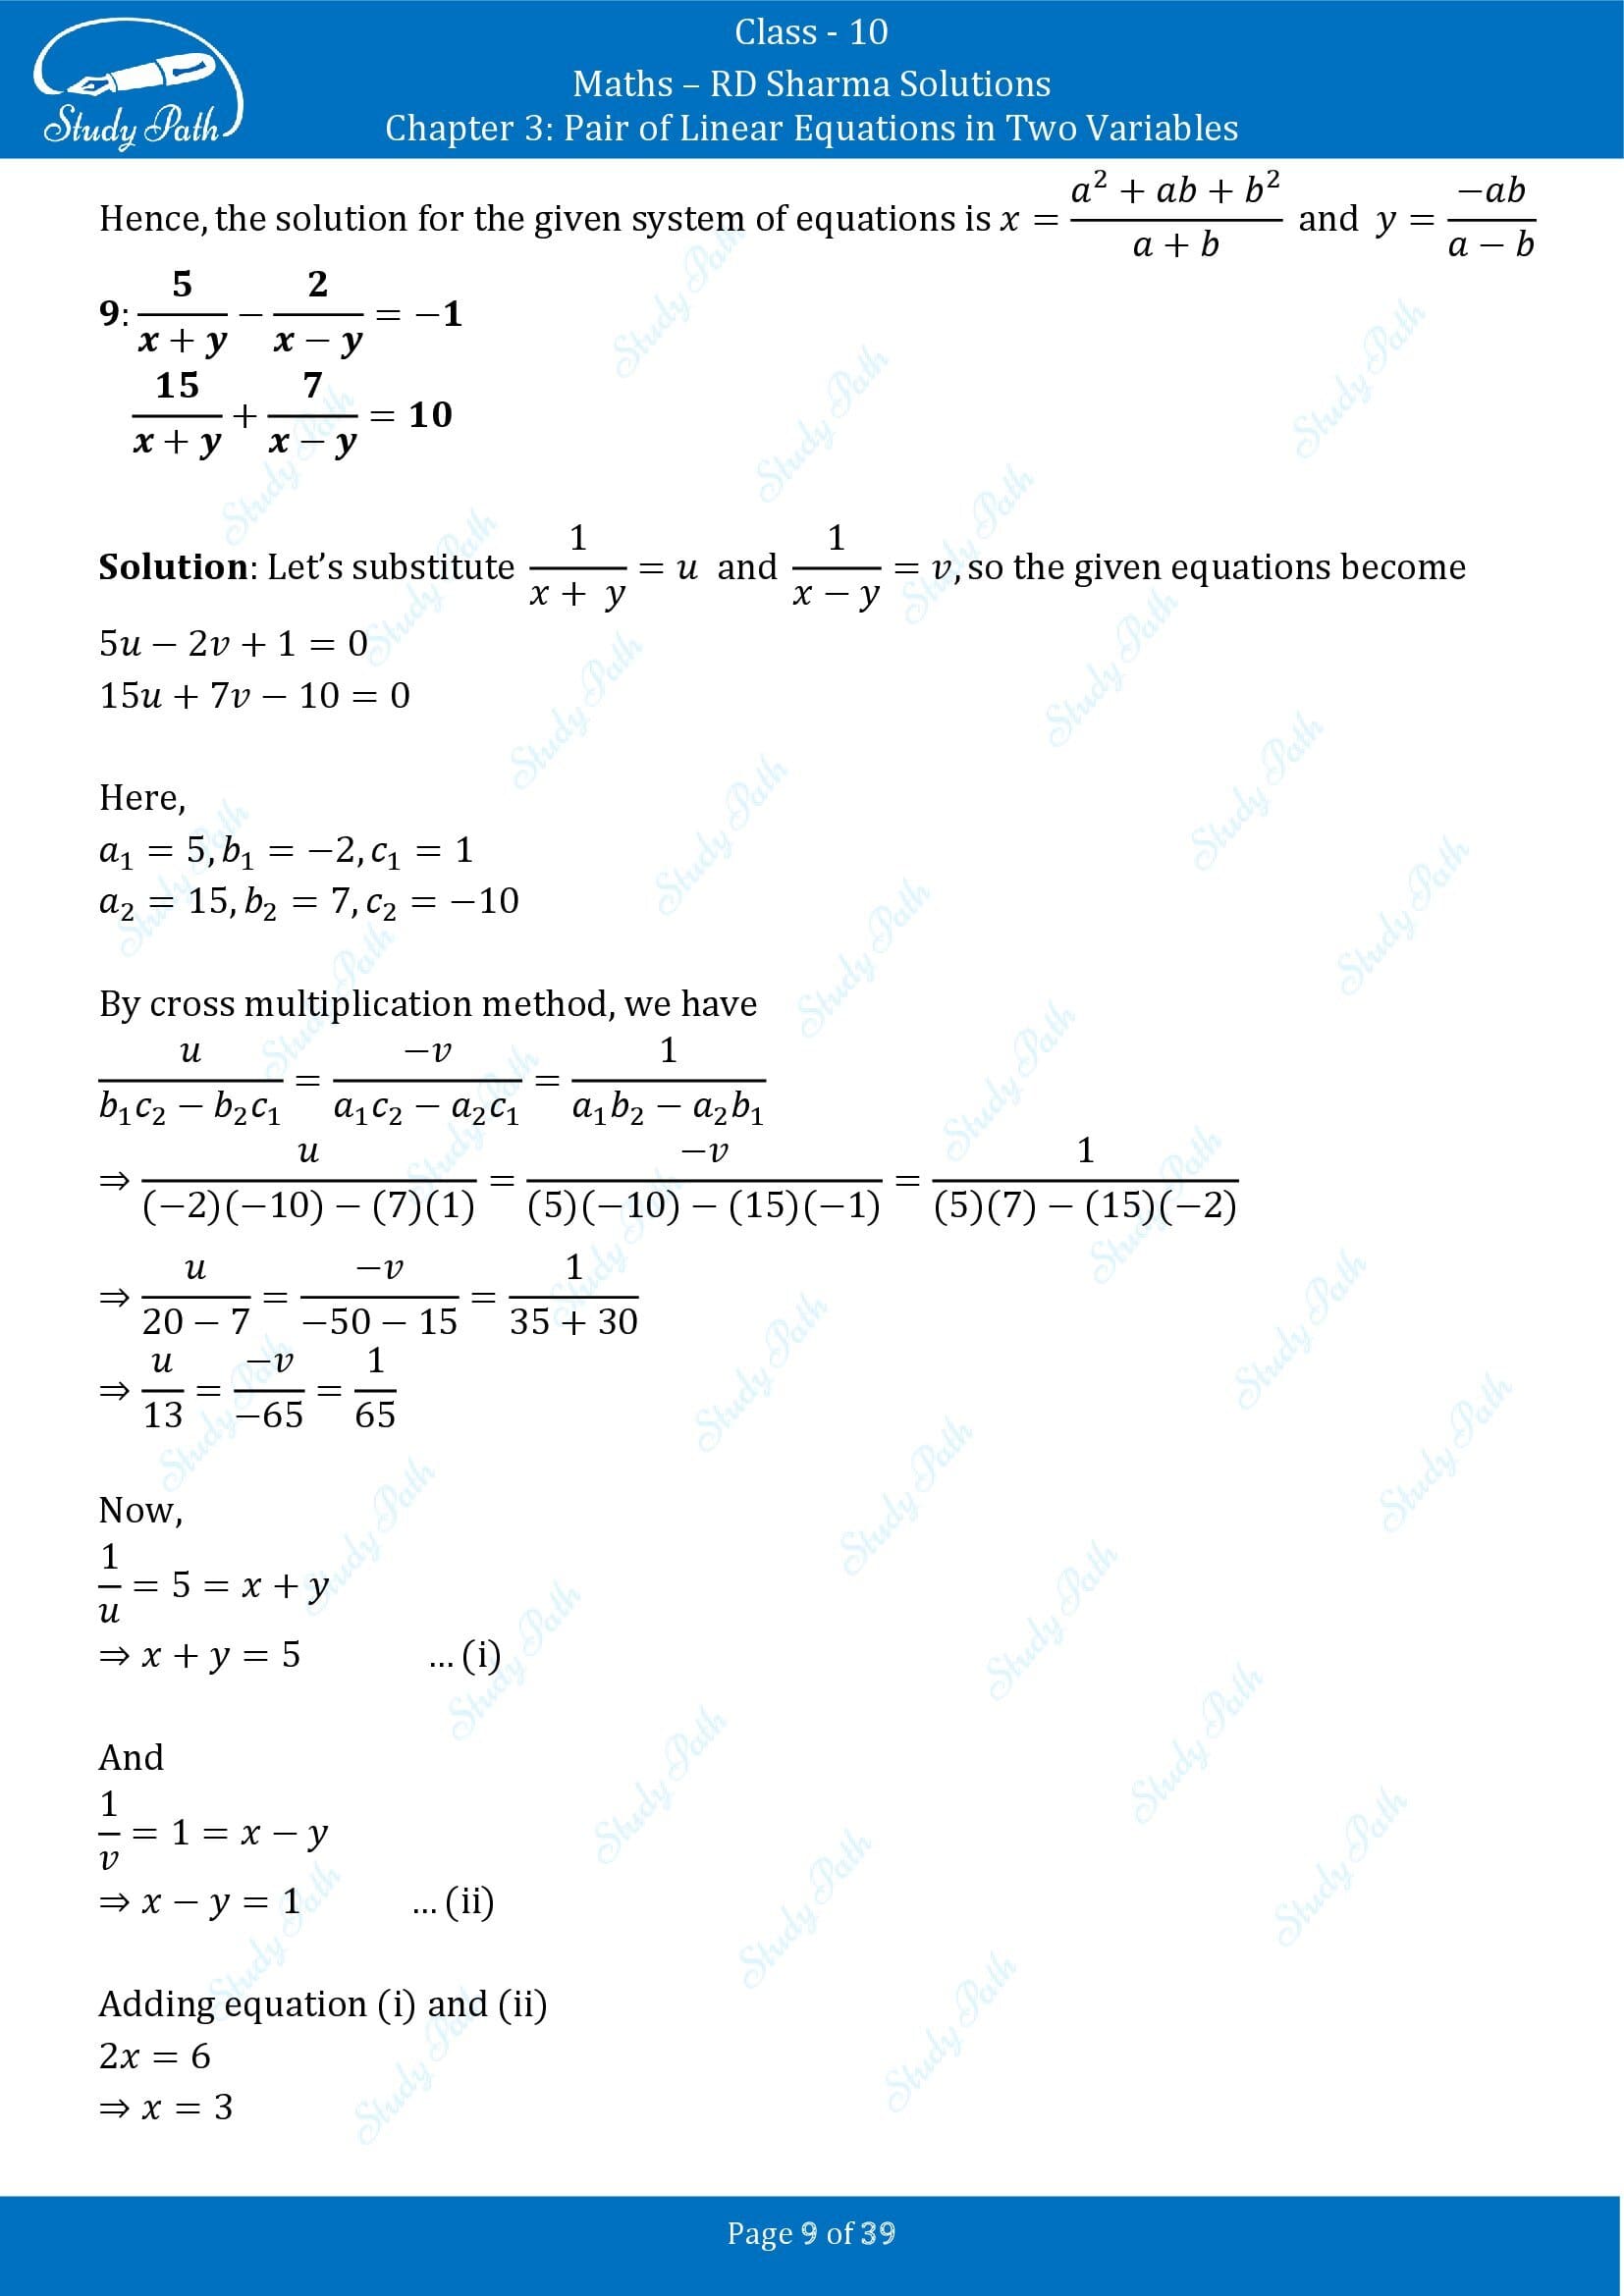 RD Sharma Solutions Class 10 Chapter 3 Pair of Linear Equations in Two Variables Exercise 3.4 00009